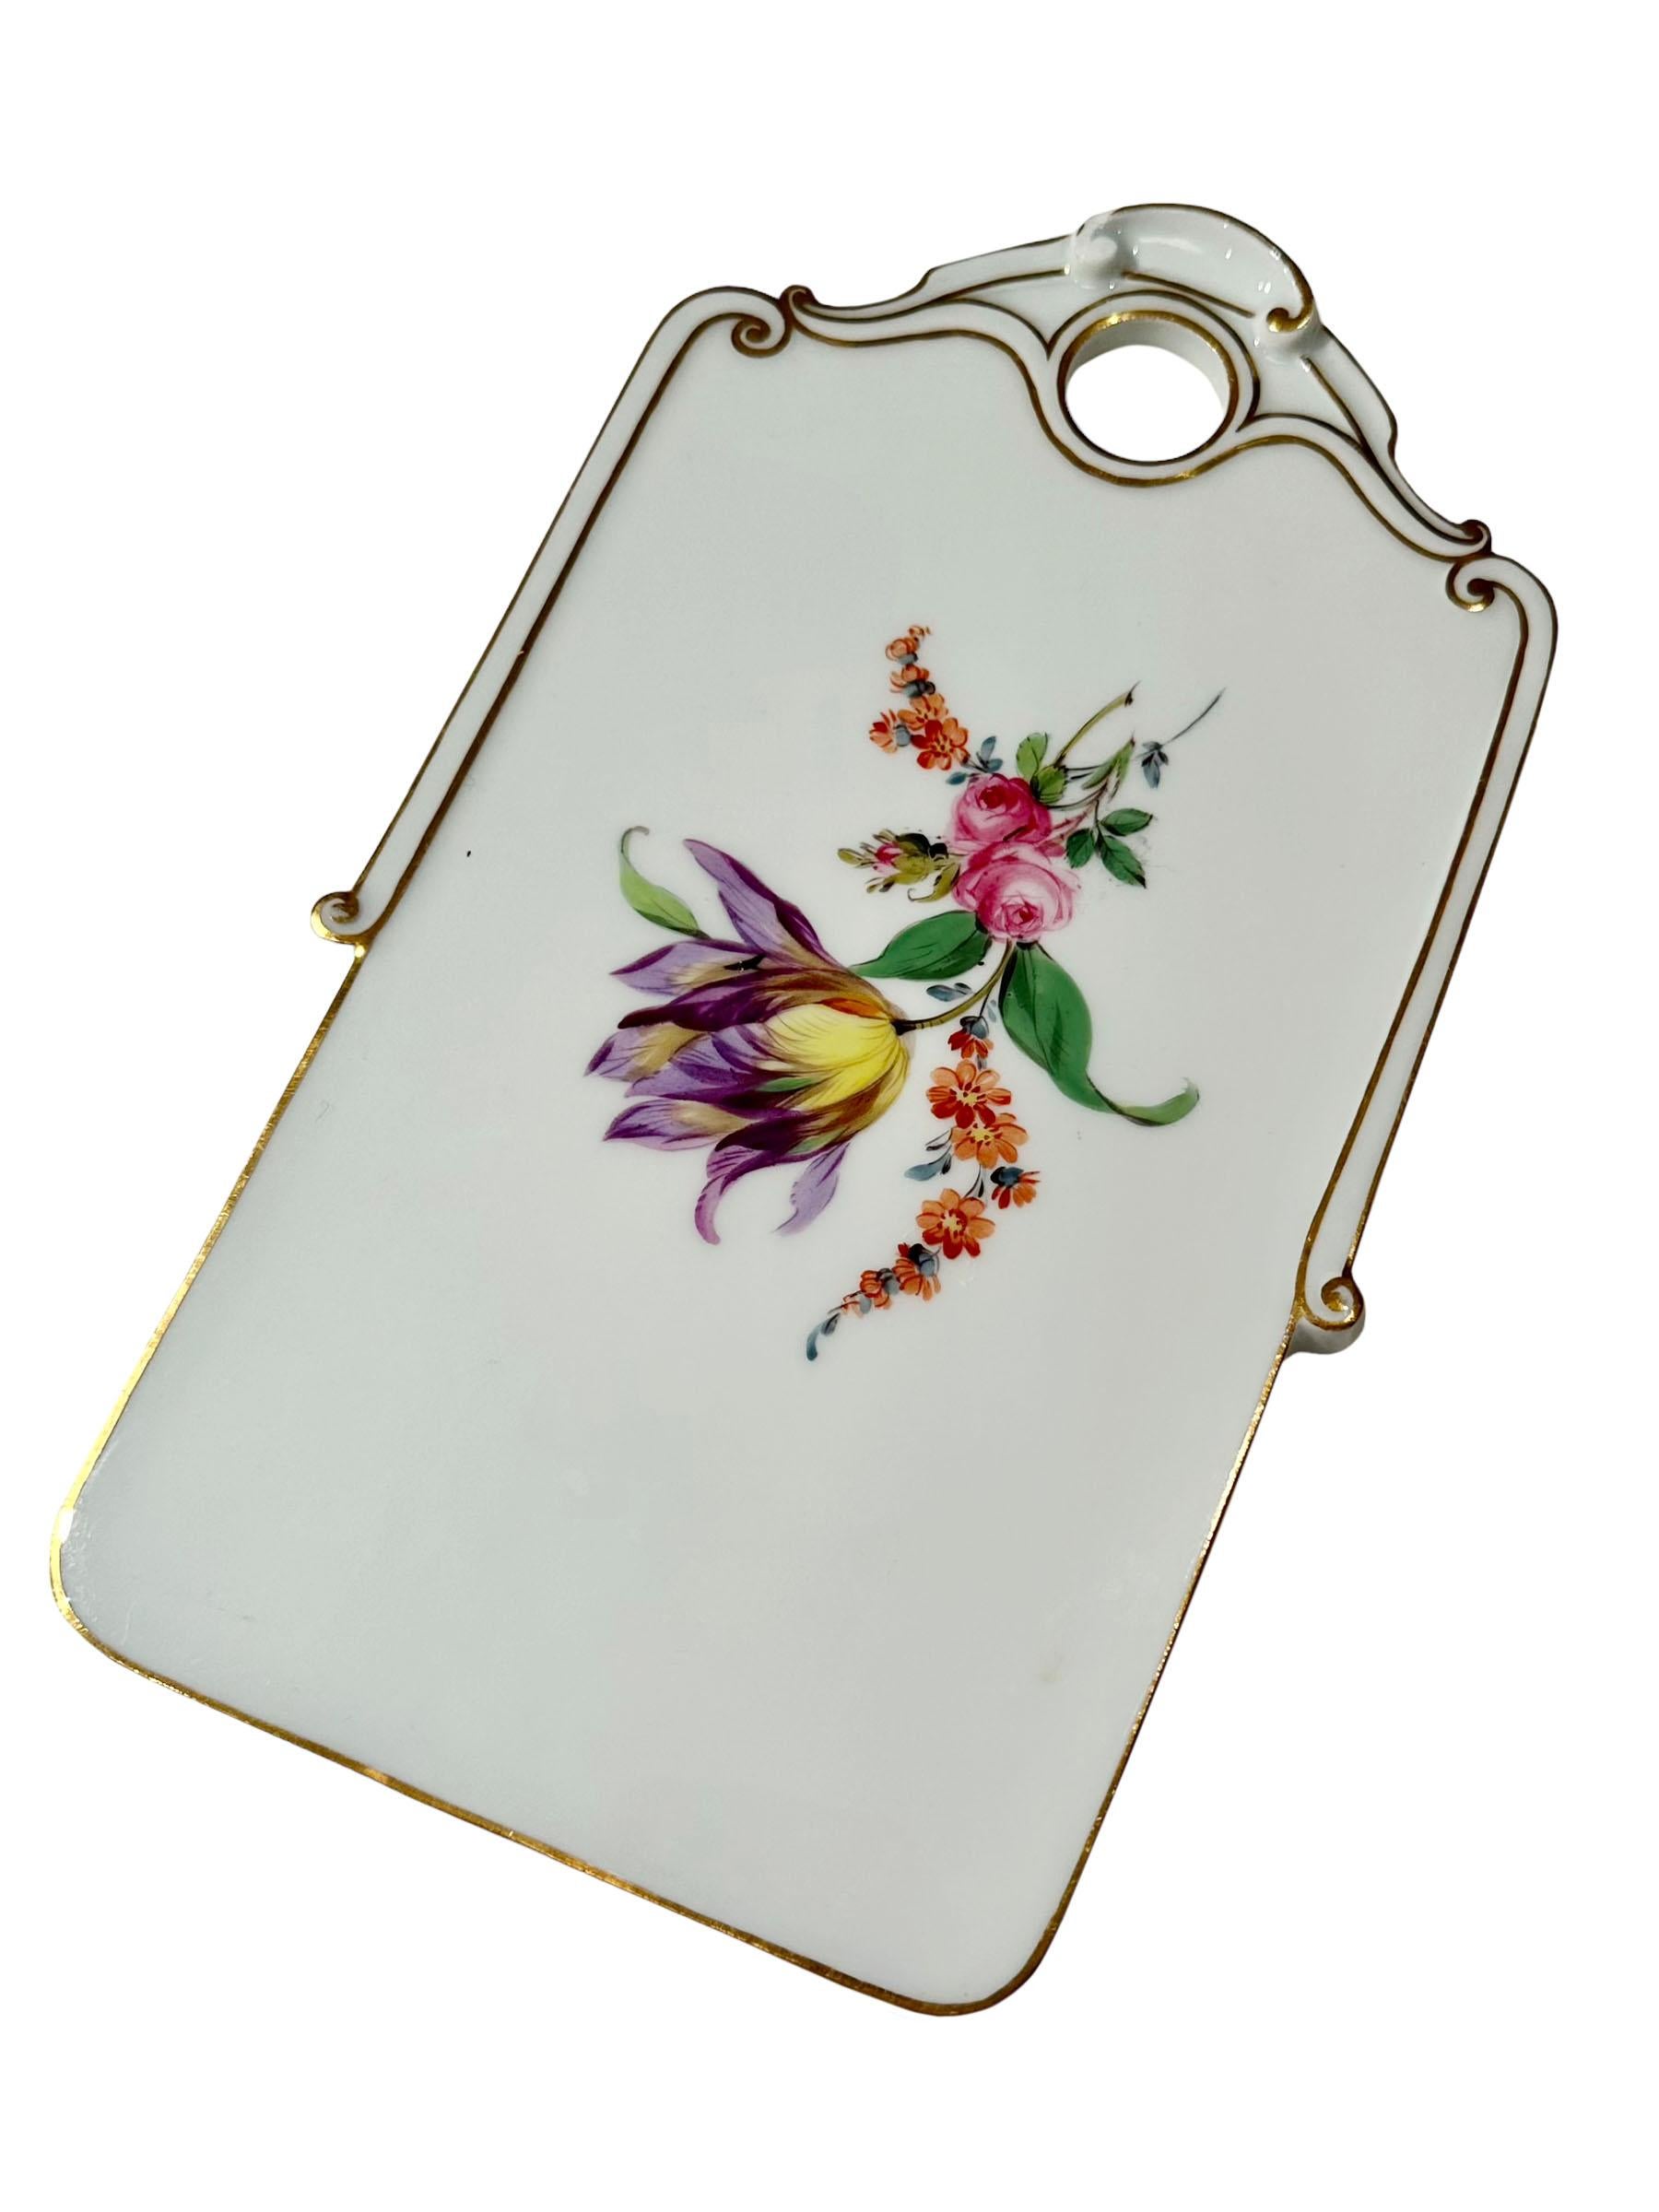 A vintage 1940s Meissen plaque with a flower bouquet on the front and Meissen mark on the reverse. 